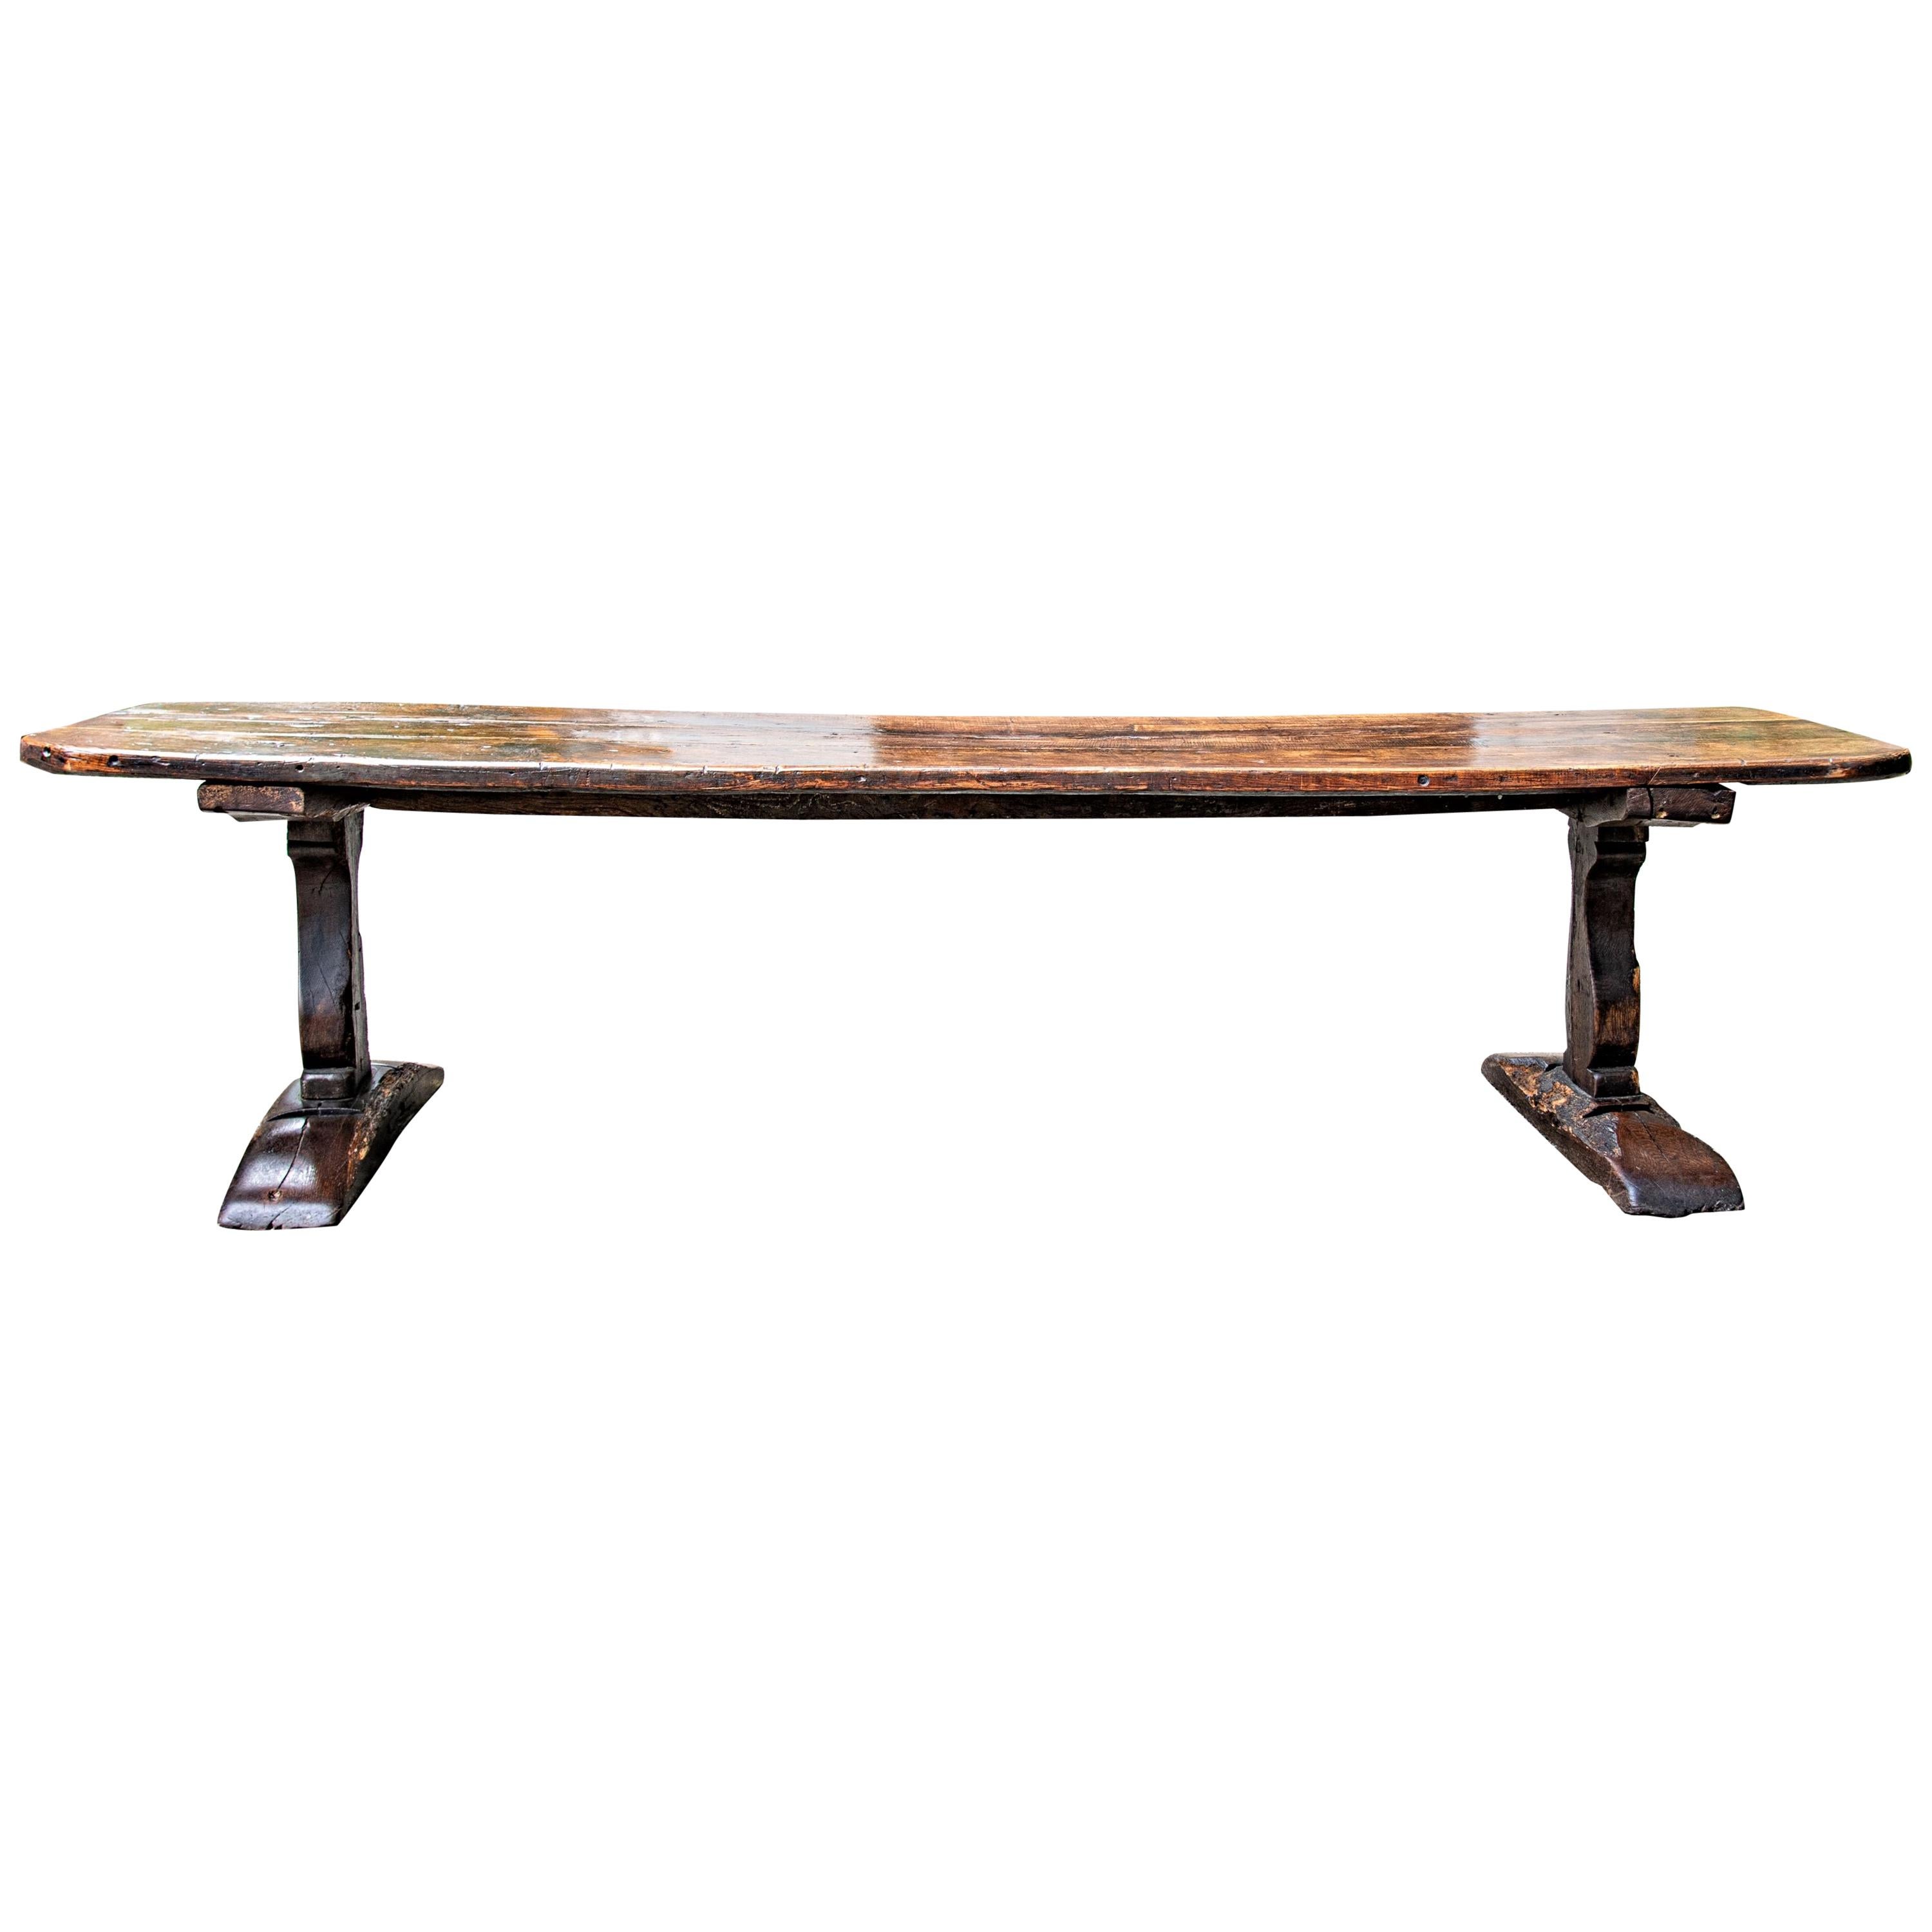 Late 16th-Early 17th Century Welsh Oak Refectory Table